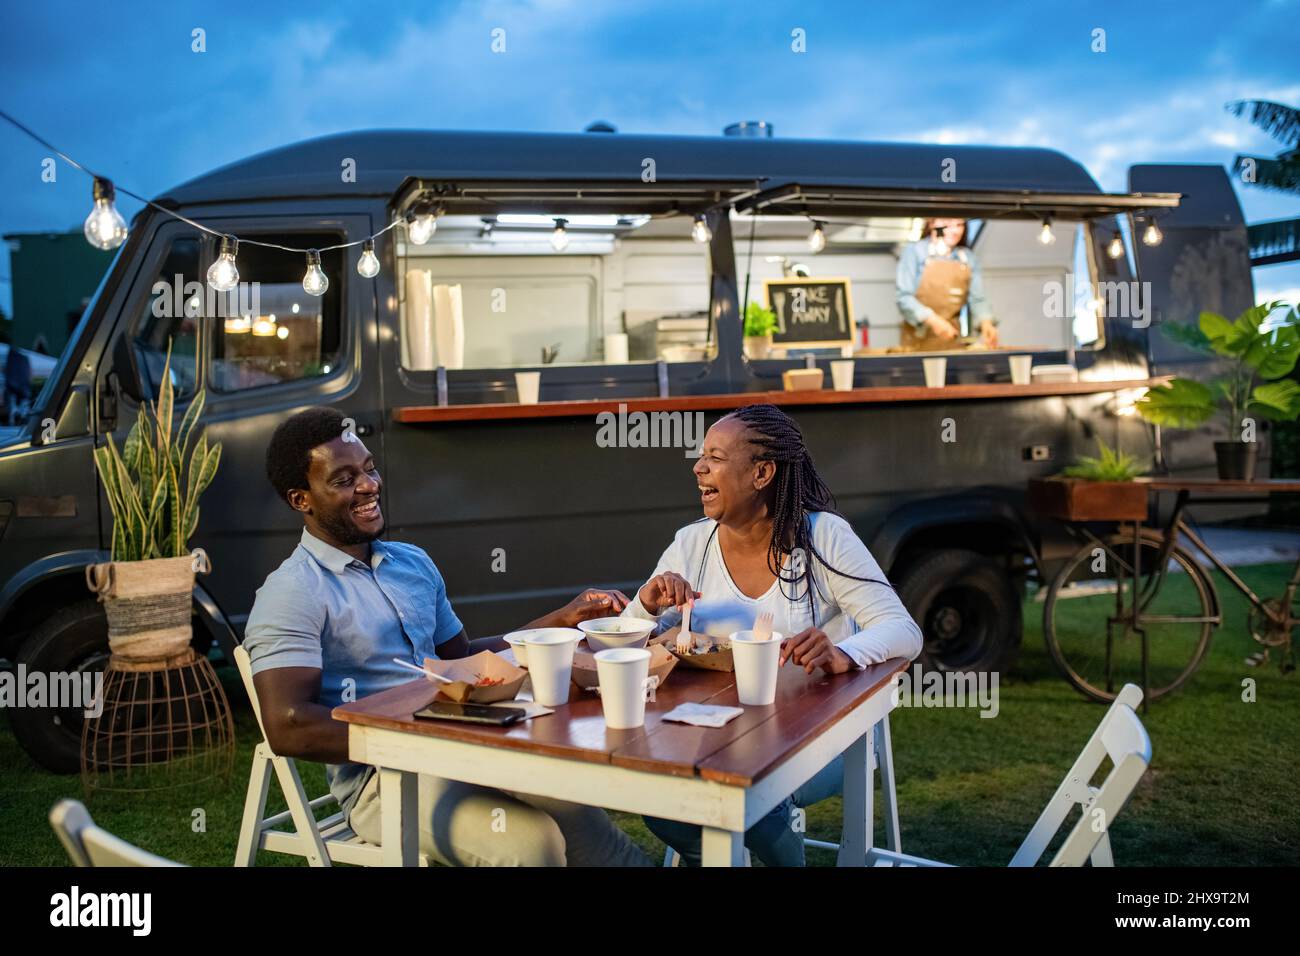 Happy black couple eating near food truck in evening Stock Photo